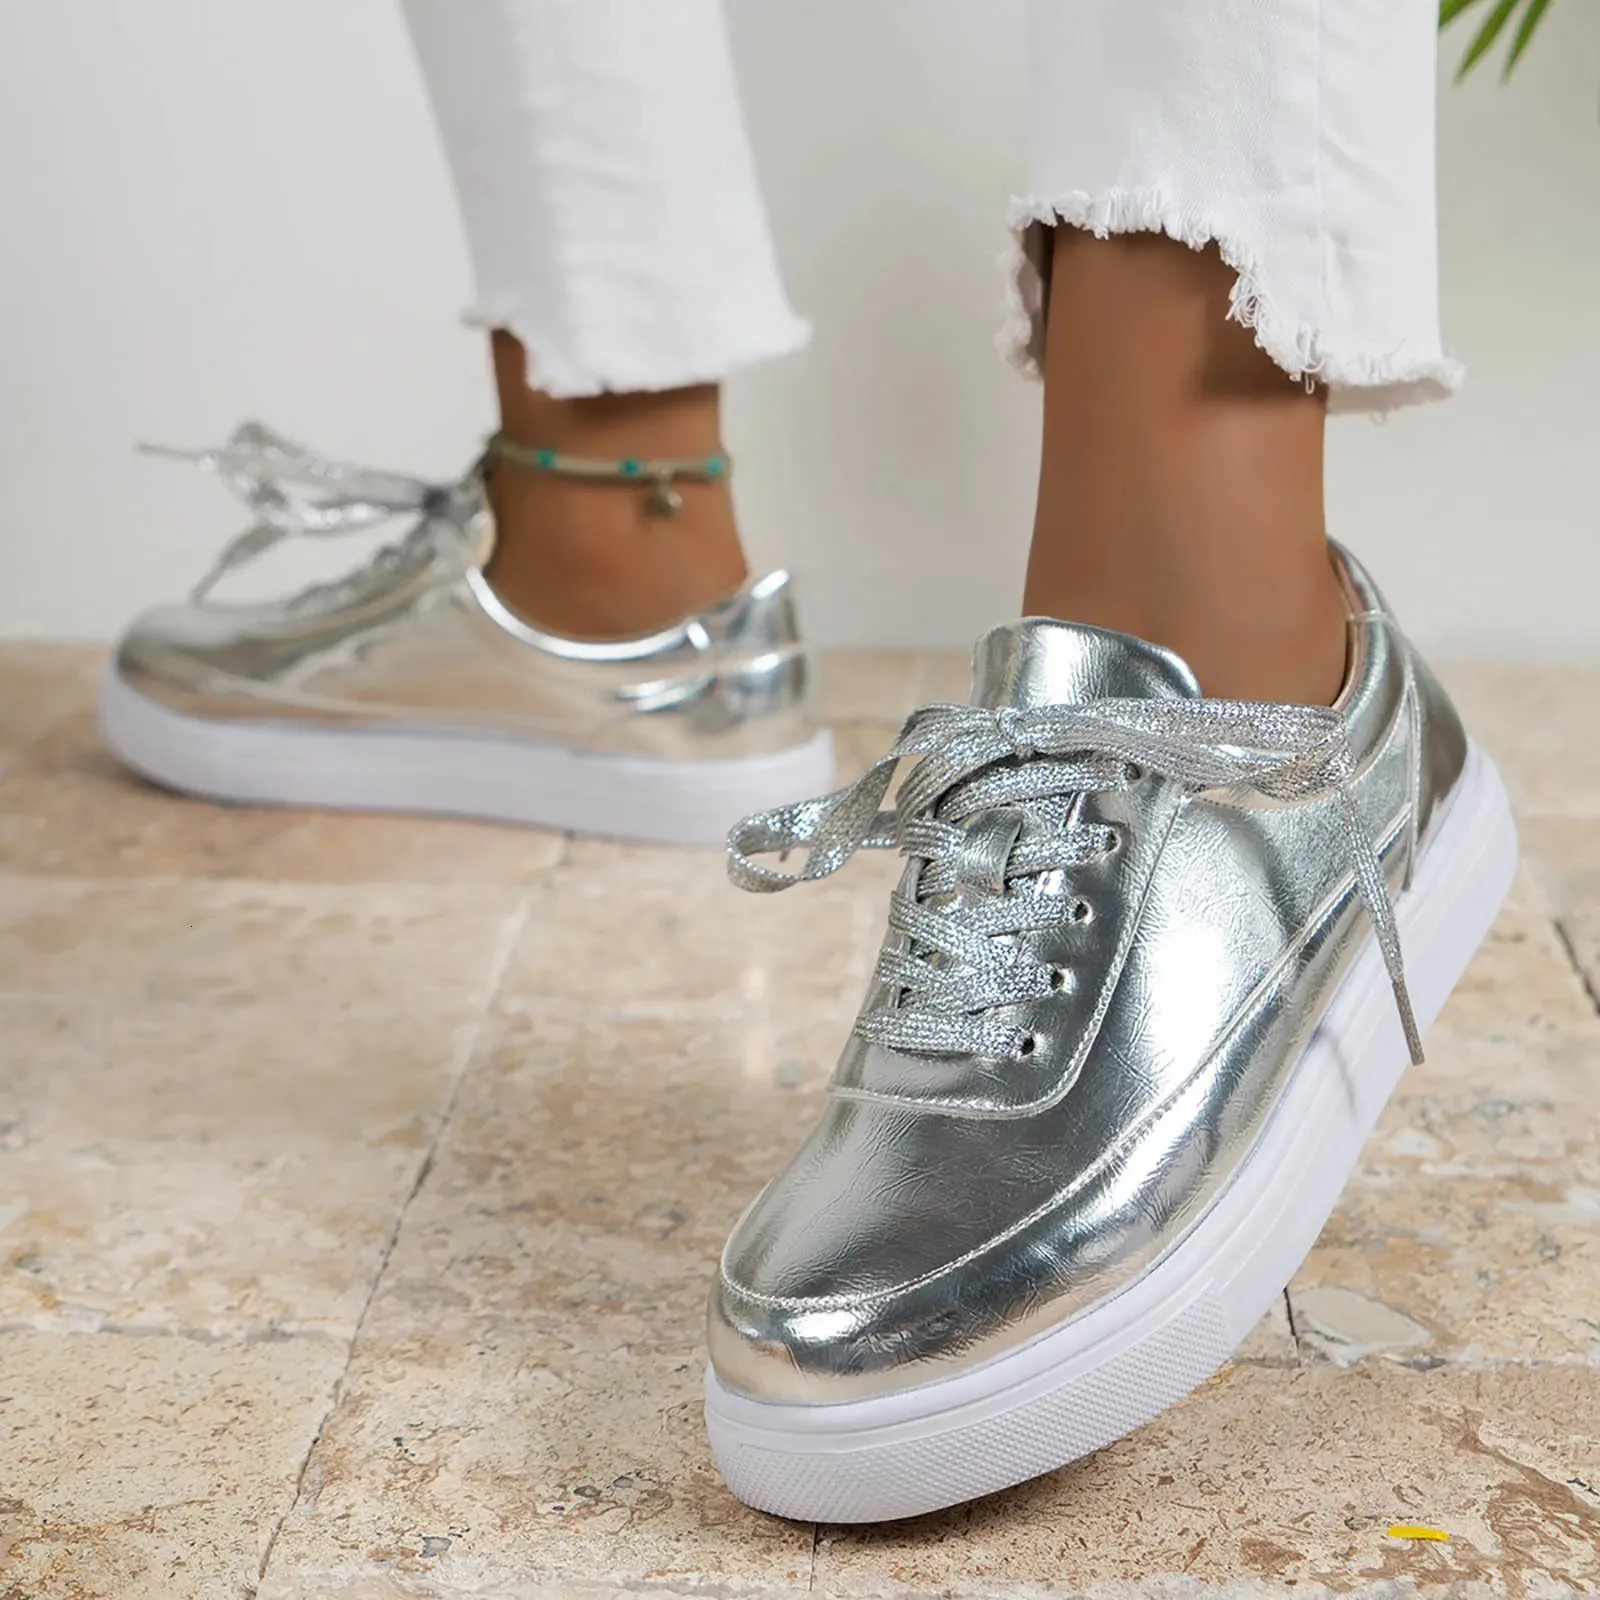 Silver Boat Shoes For Women Thick Platform Casual Sneakers Height Increasing Lace Up Footwear Round Toe Ladies Flat Sapato 240329